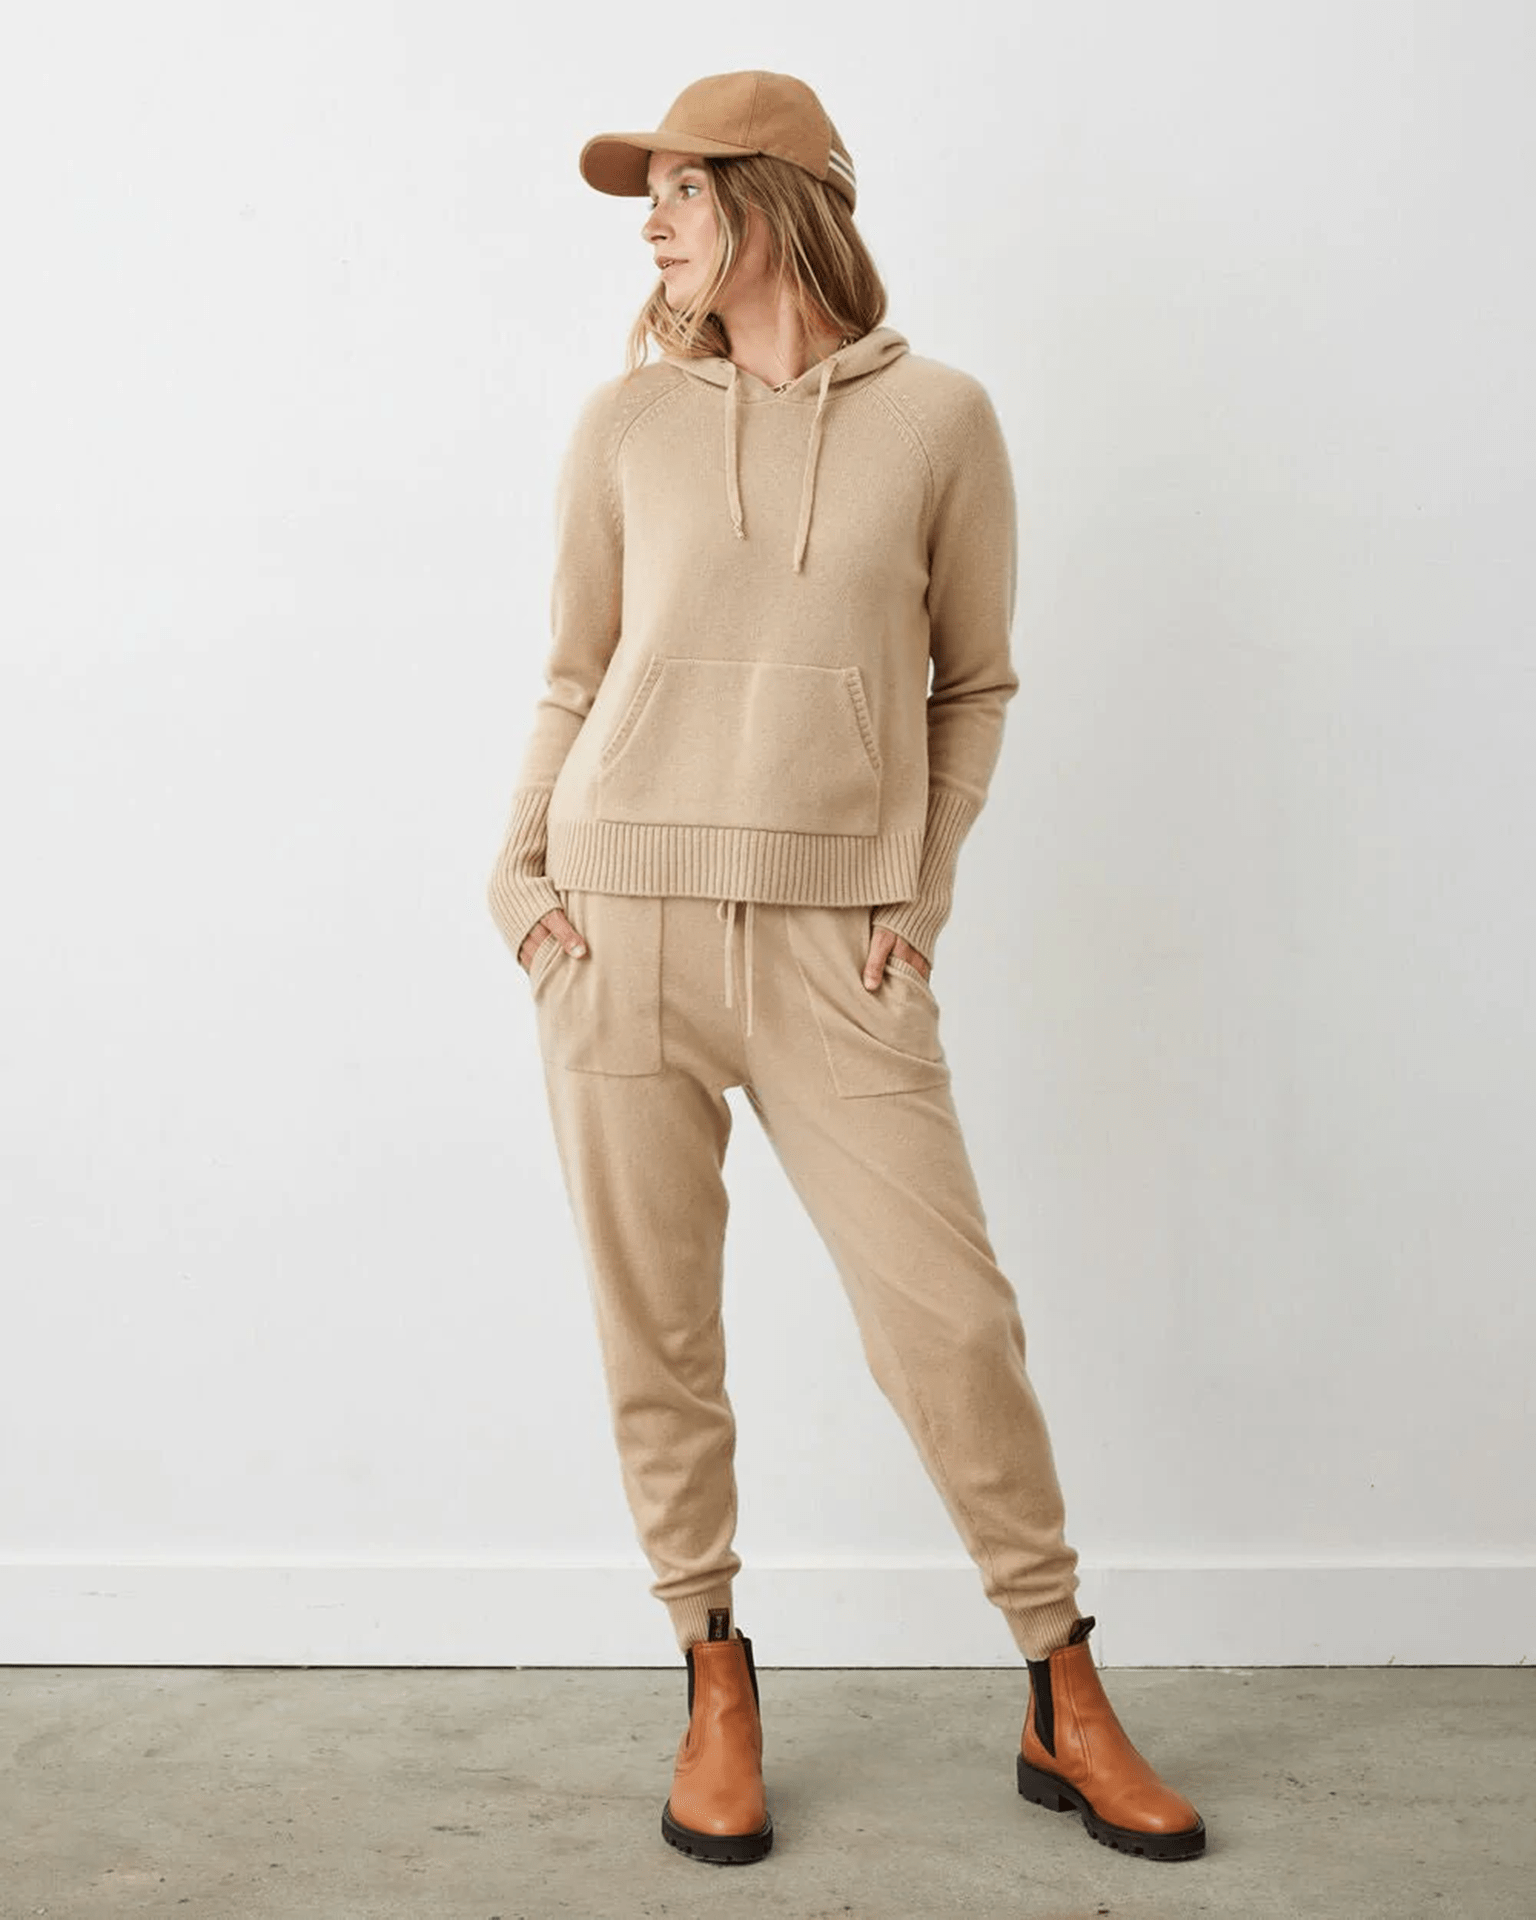 https://www.blissboutiques.com/cdn/shop/products/bliss-bouqitues-not-monday-brooklyn-cashmere-sweatpants-in-camel-30115552559201.png?v=1666683251